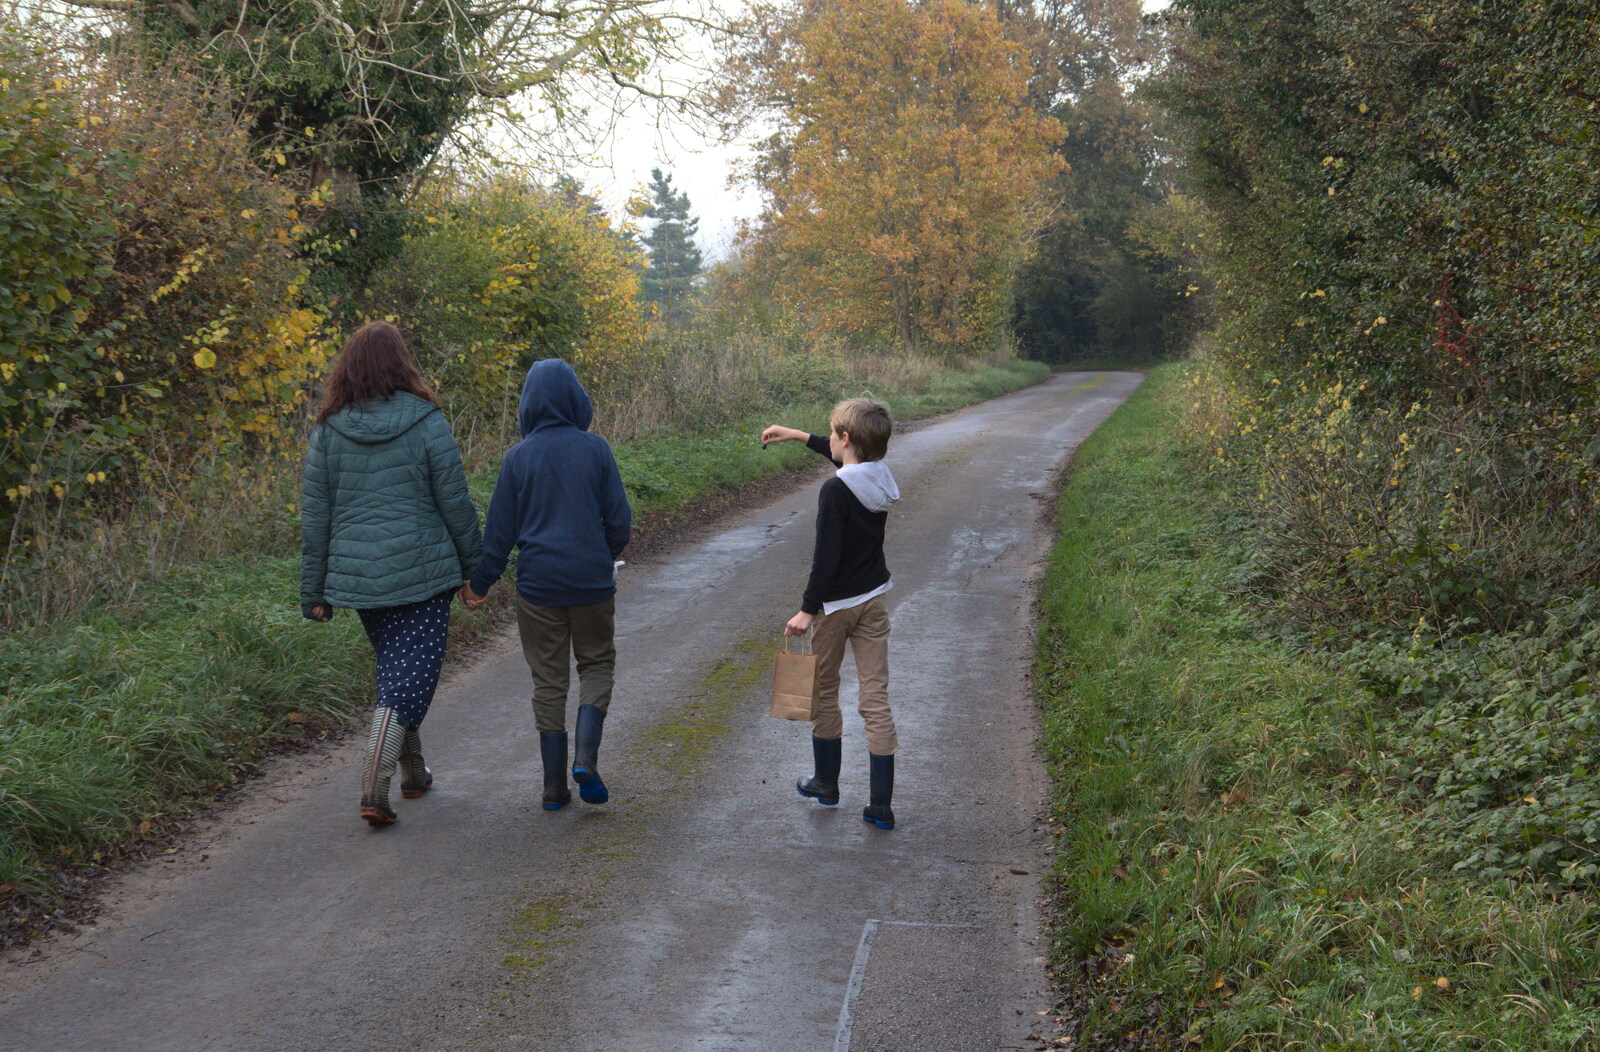 The gang on the road back to Brome from To See the Hairy Pigs, Thrandeston, Suffolk - 7th November 2020